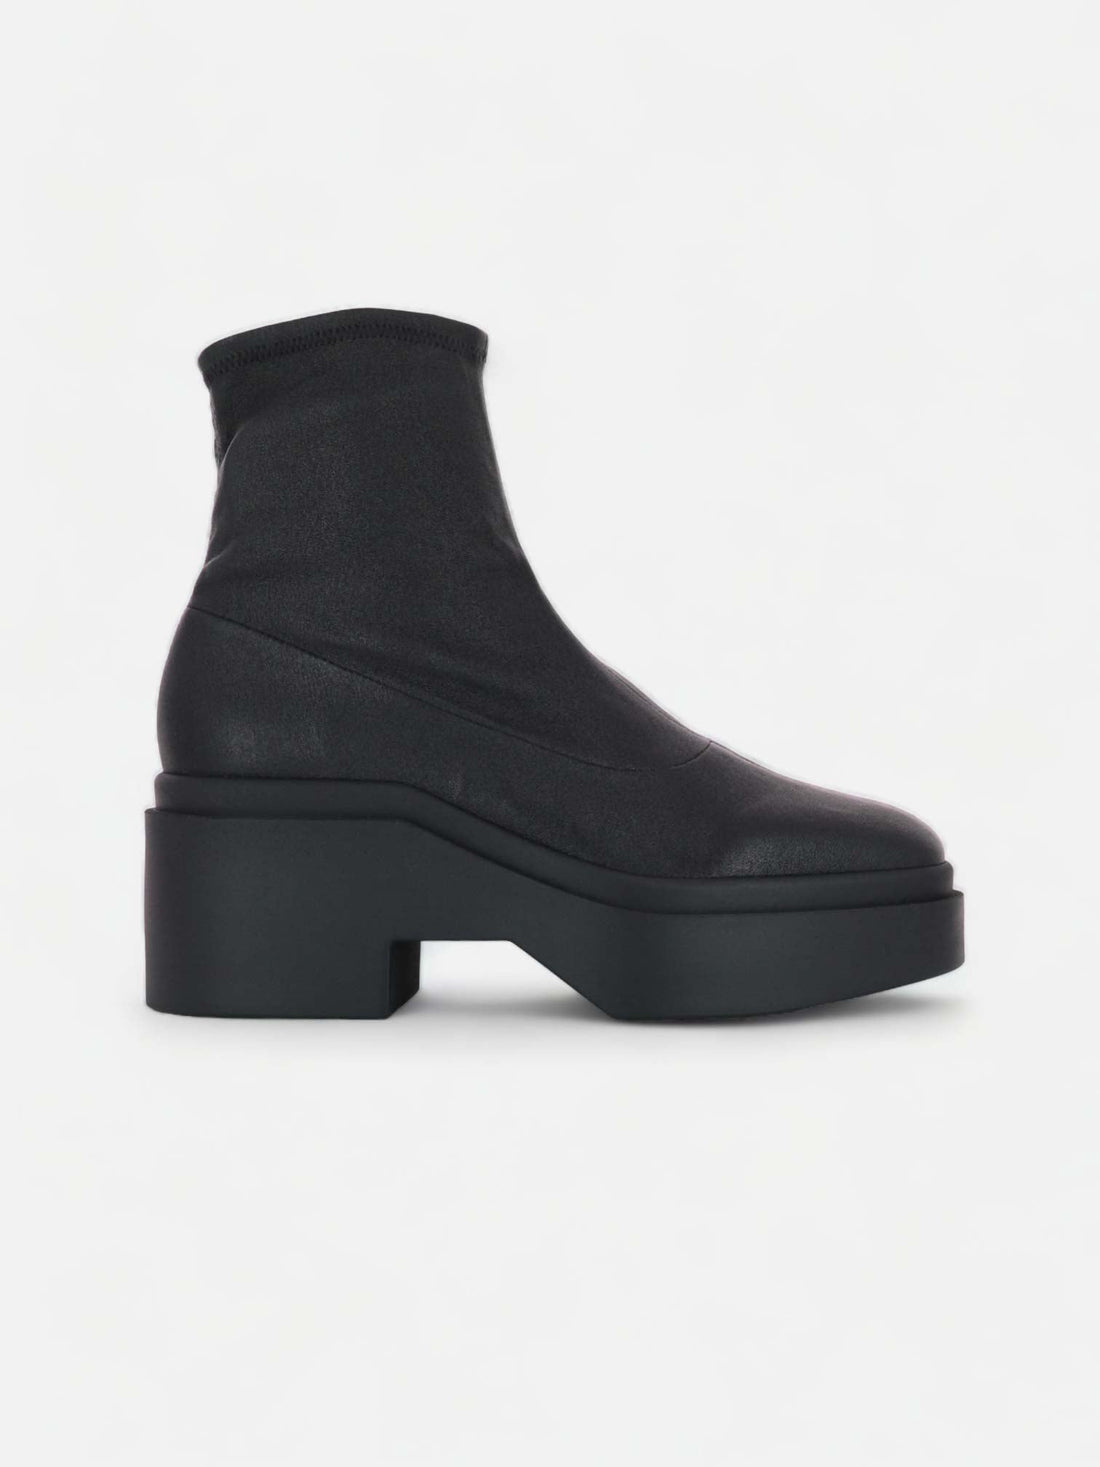 ANKLE BOOTS - NELLE ankle boots, stretch lambskin black - 3606063976770 - Clergerie Paris - Europe